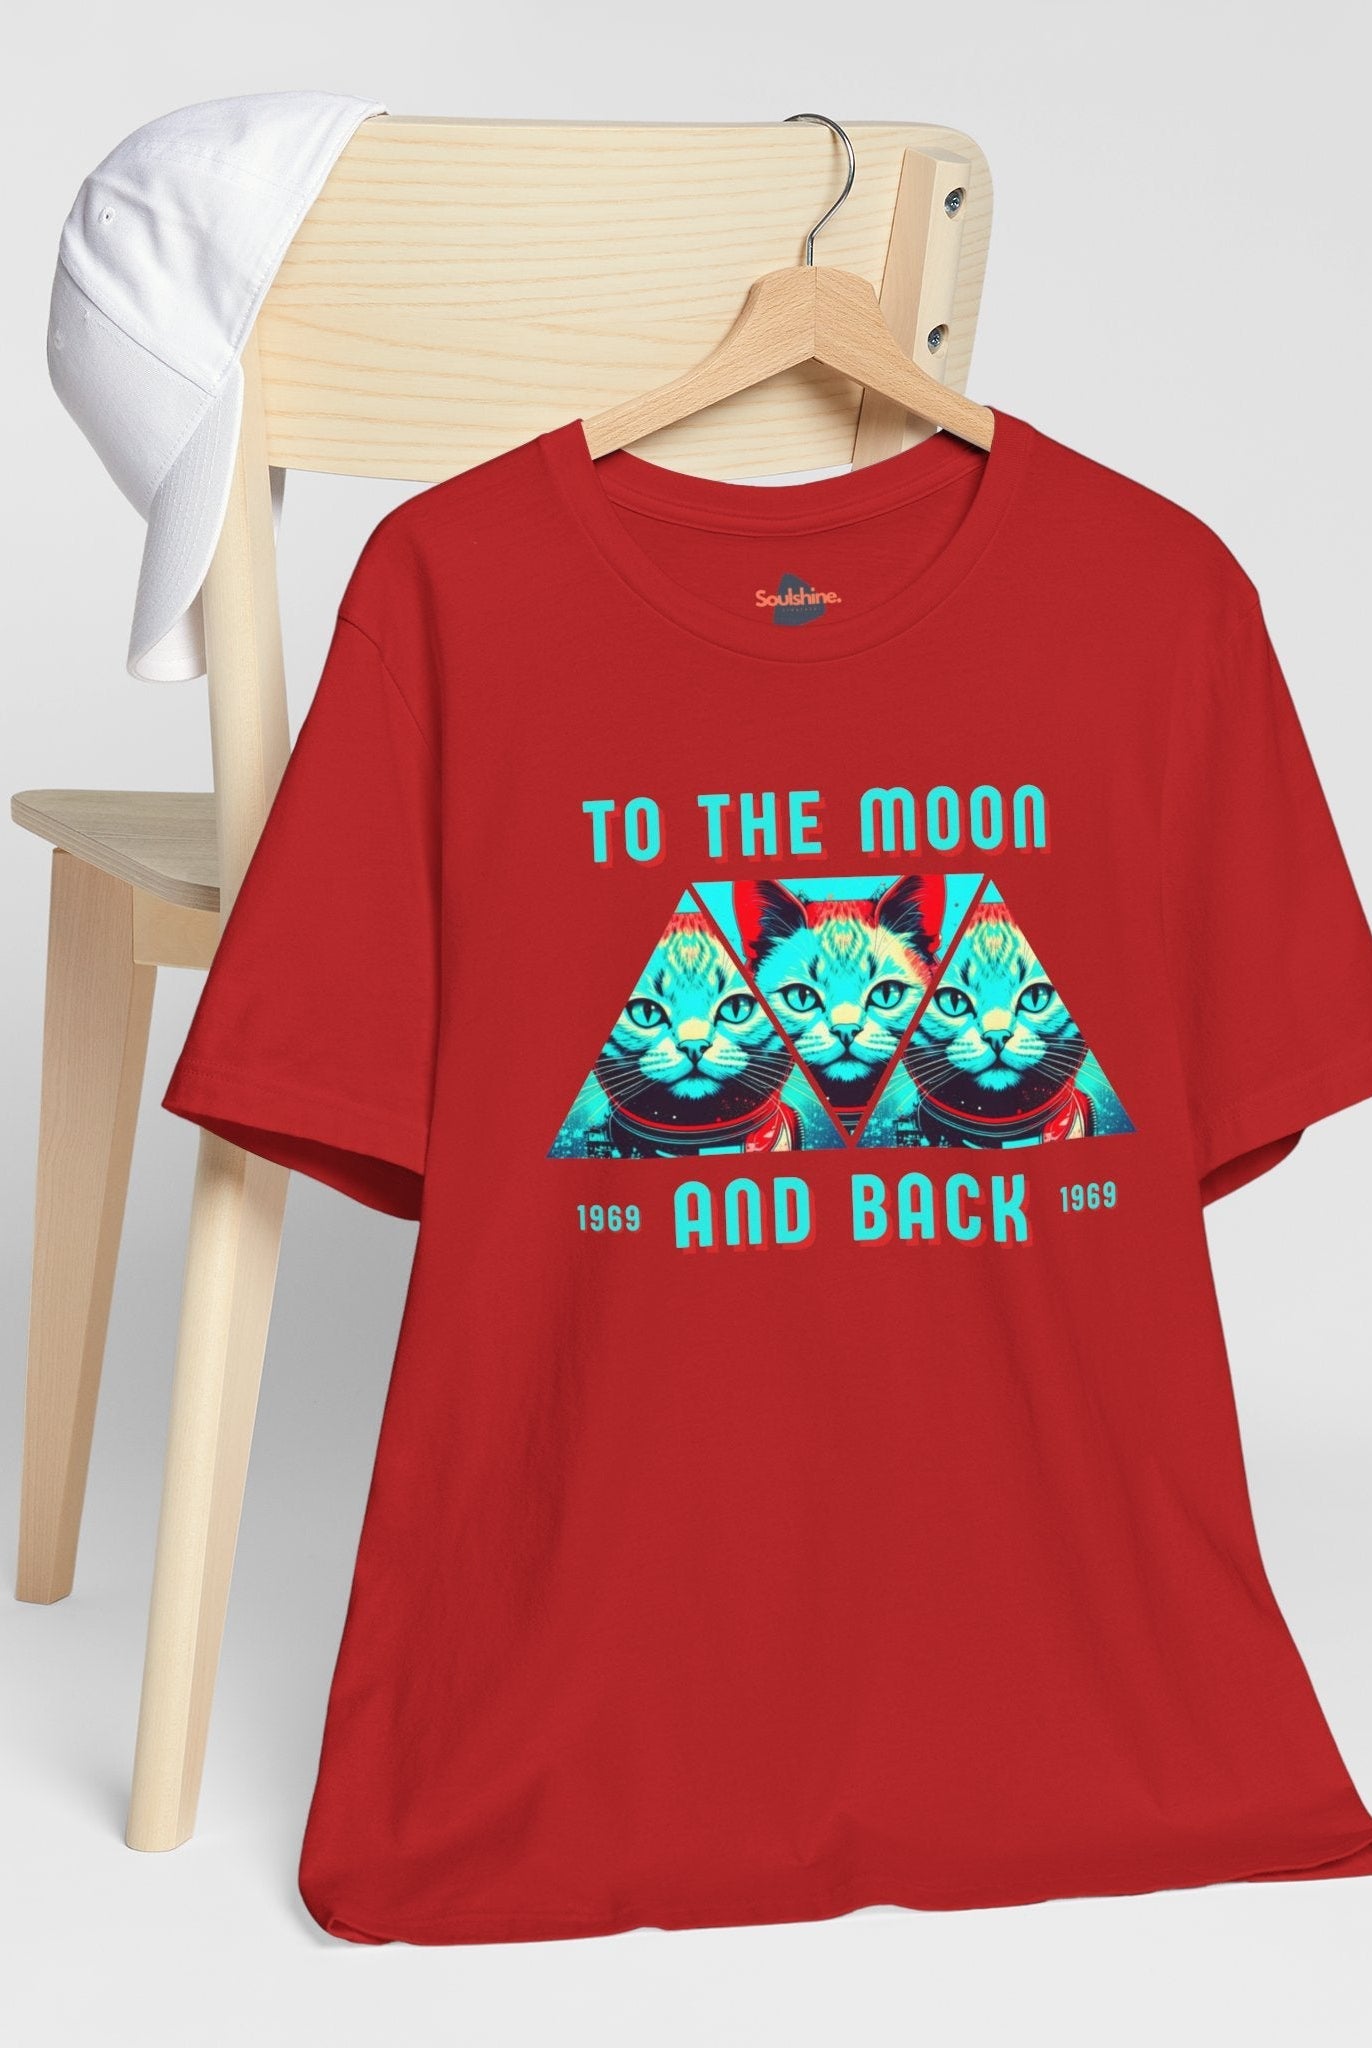 To the moon and back - Soulshinecreators - Unisex Jersey Short Sleeve Tee - US T-Shirt by Soulshinecreators | Soulshinecreators